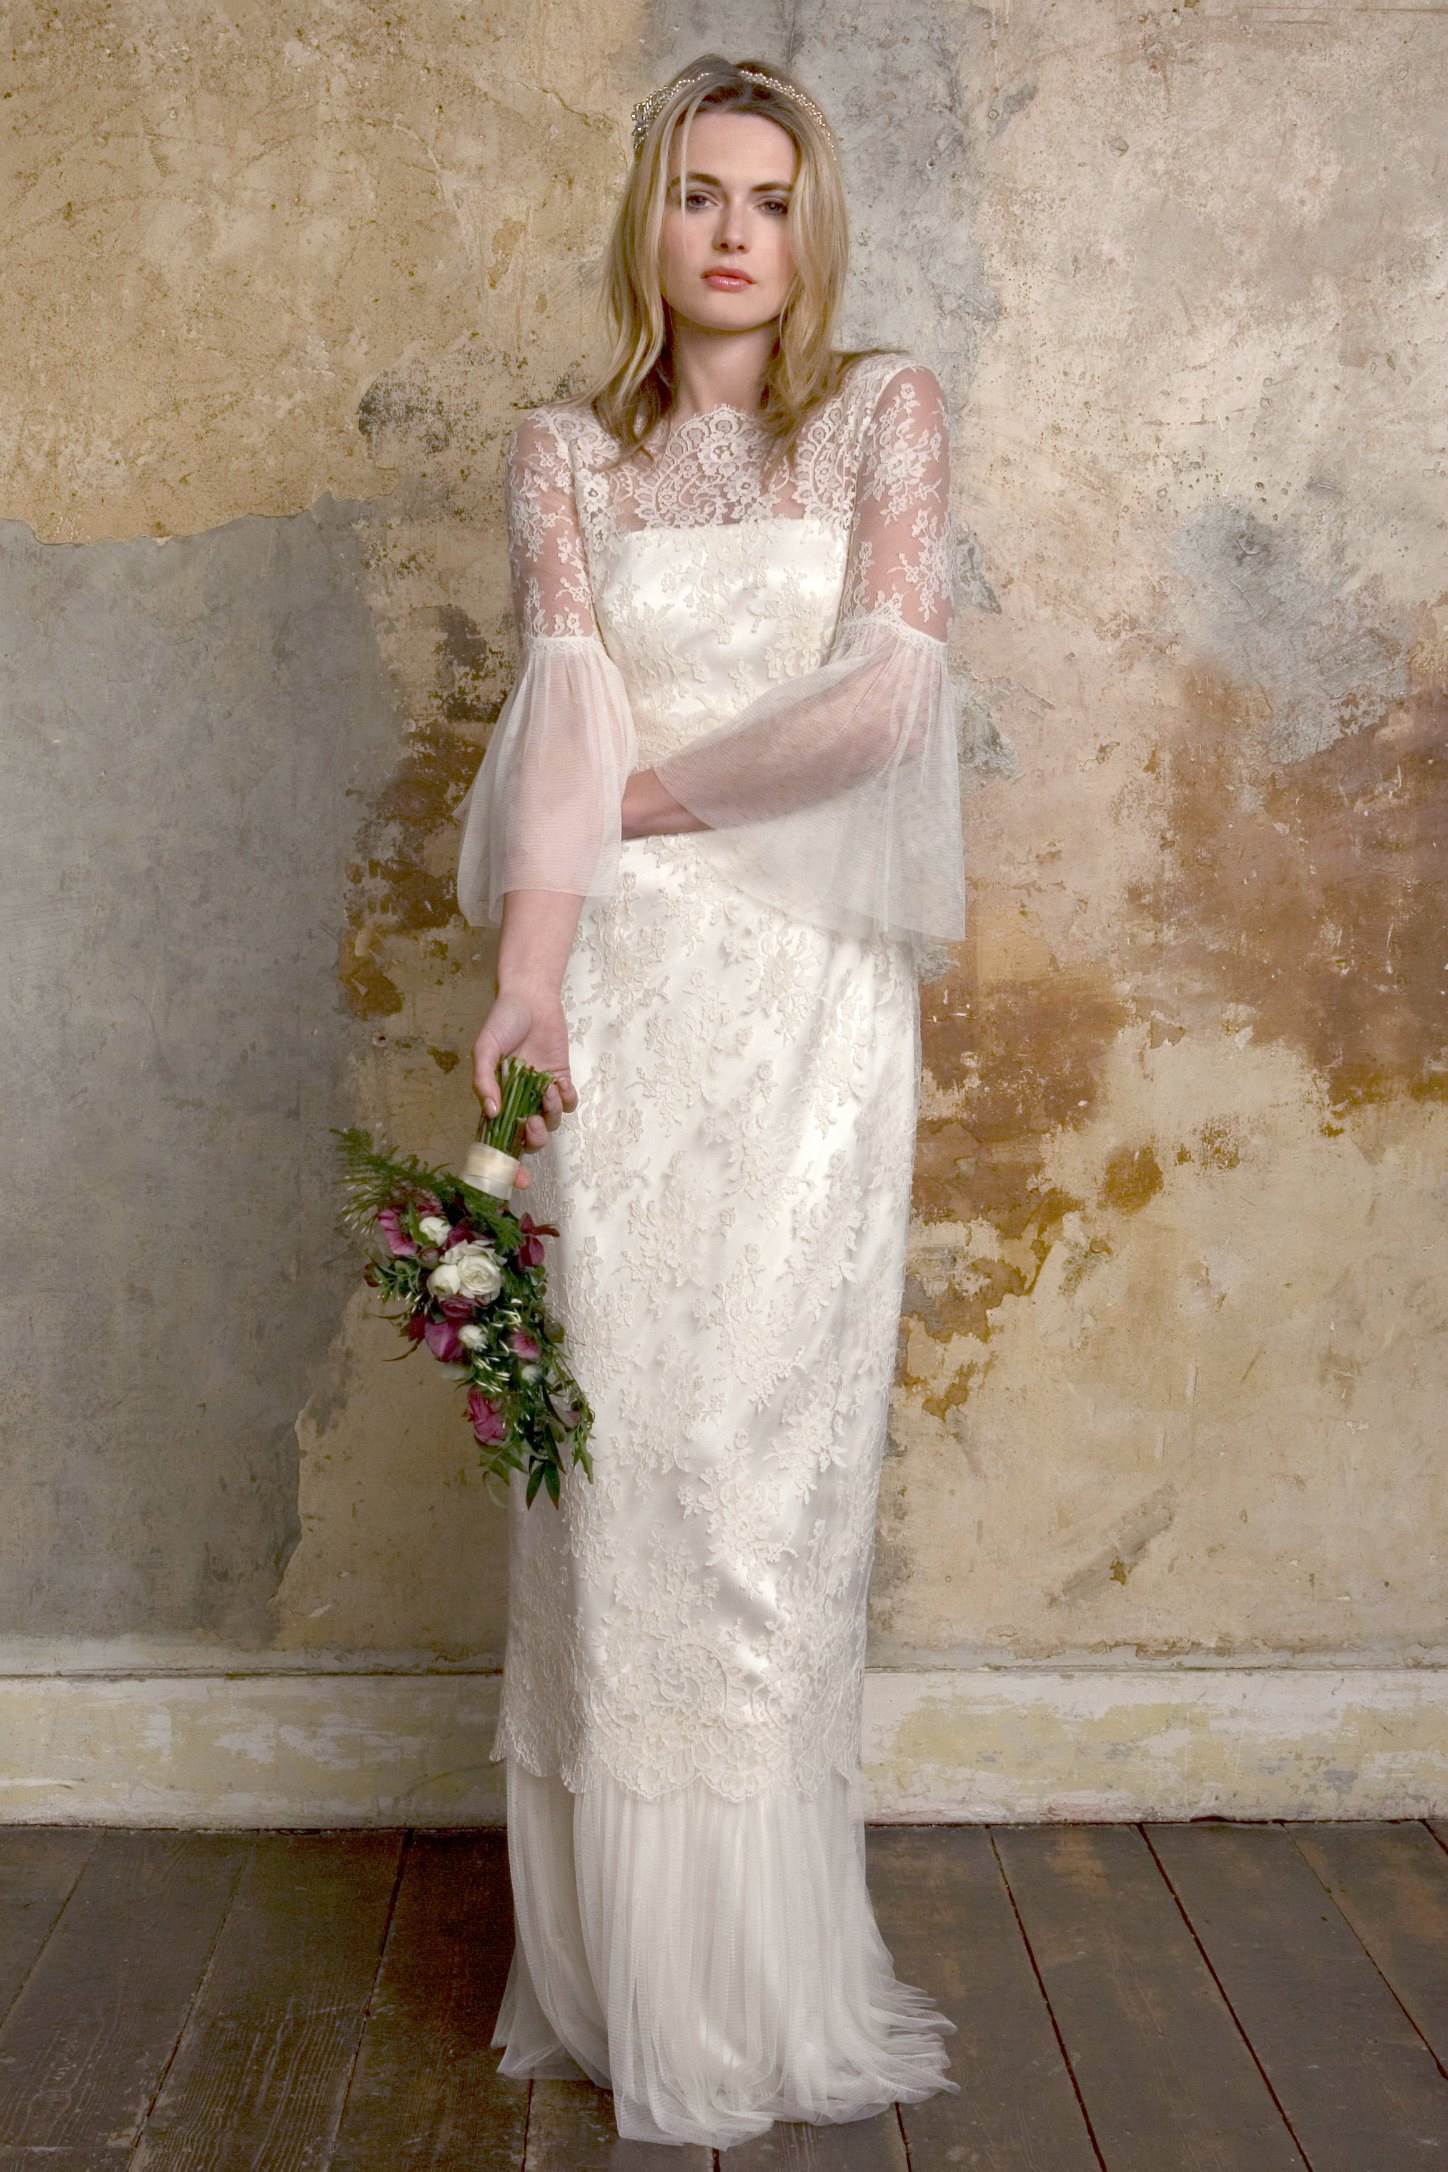 Sally Lacock 1970s inspired wedding dresses as featured on The Ntaional Vintage Wedding Fair blog